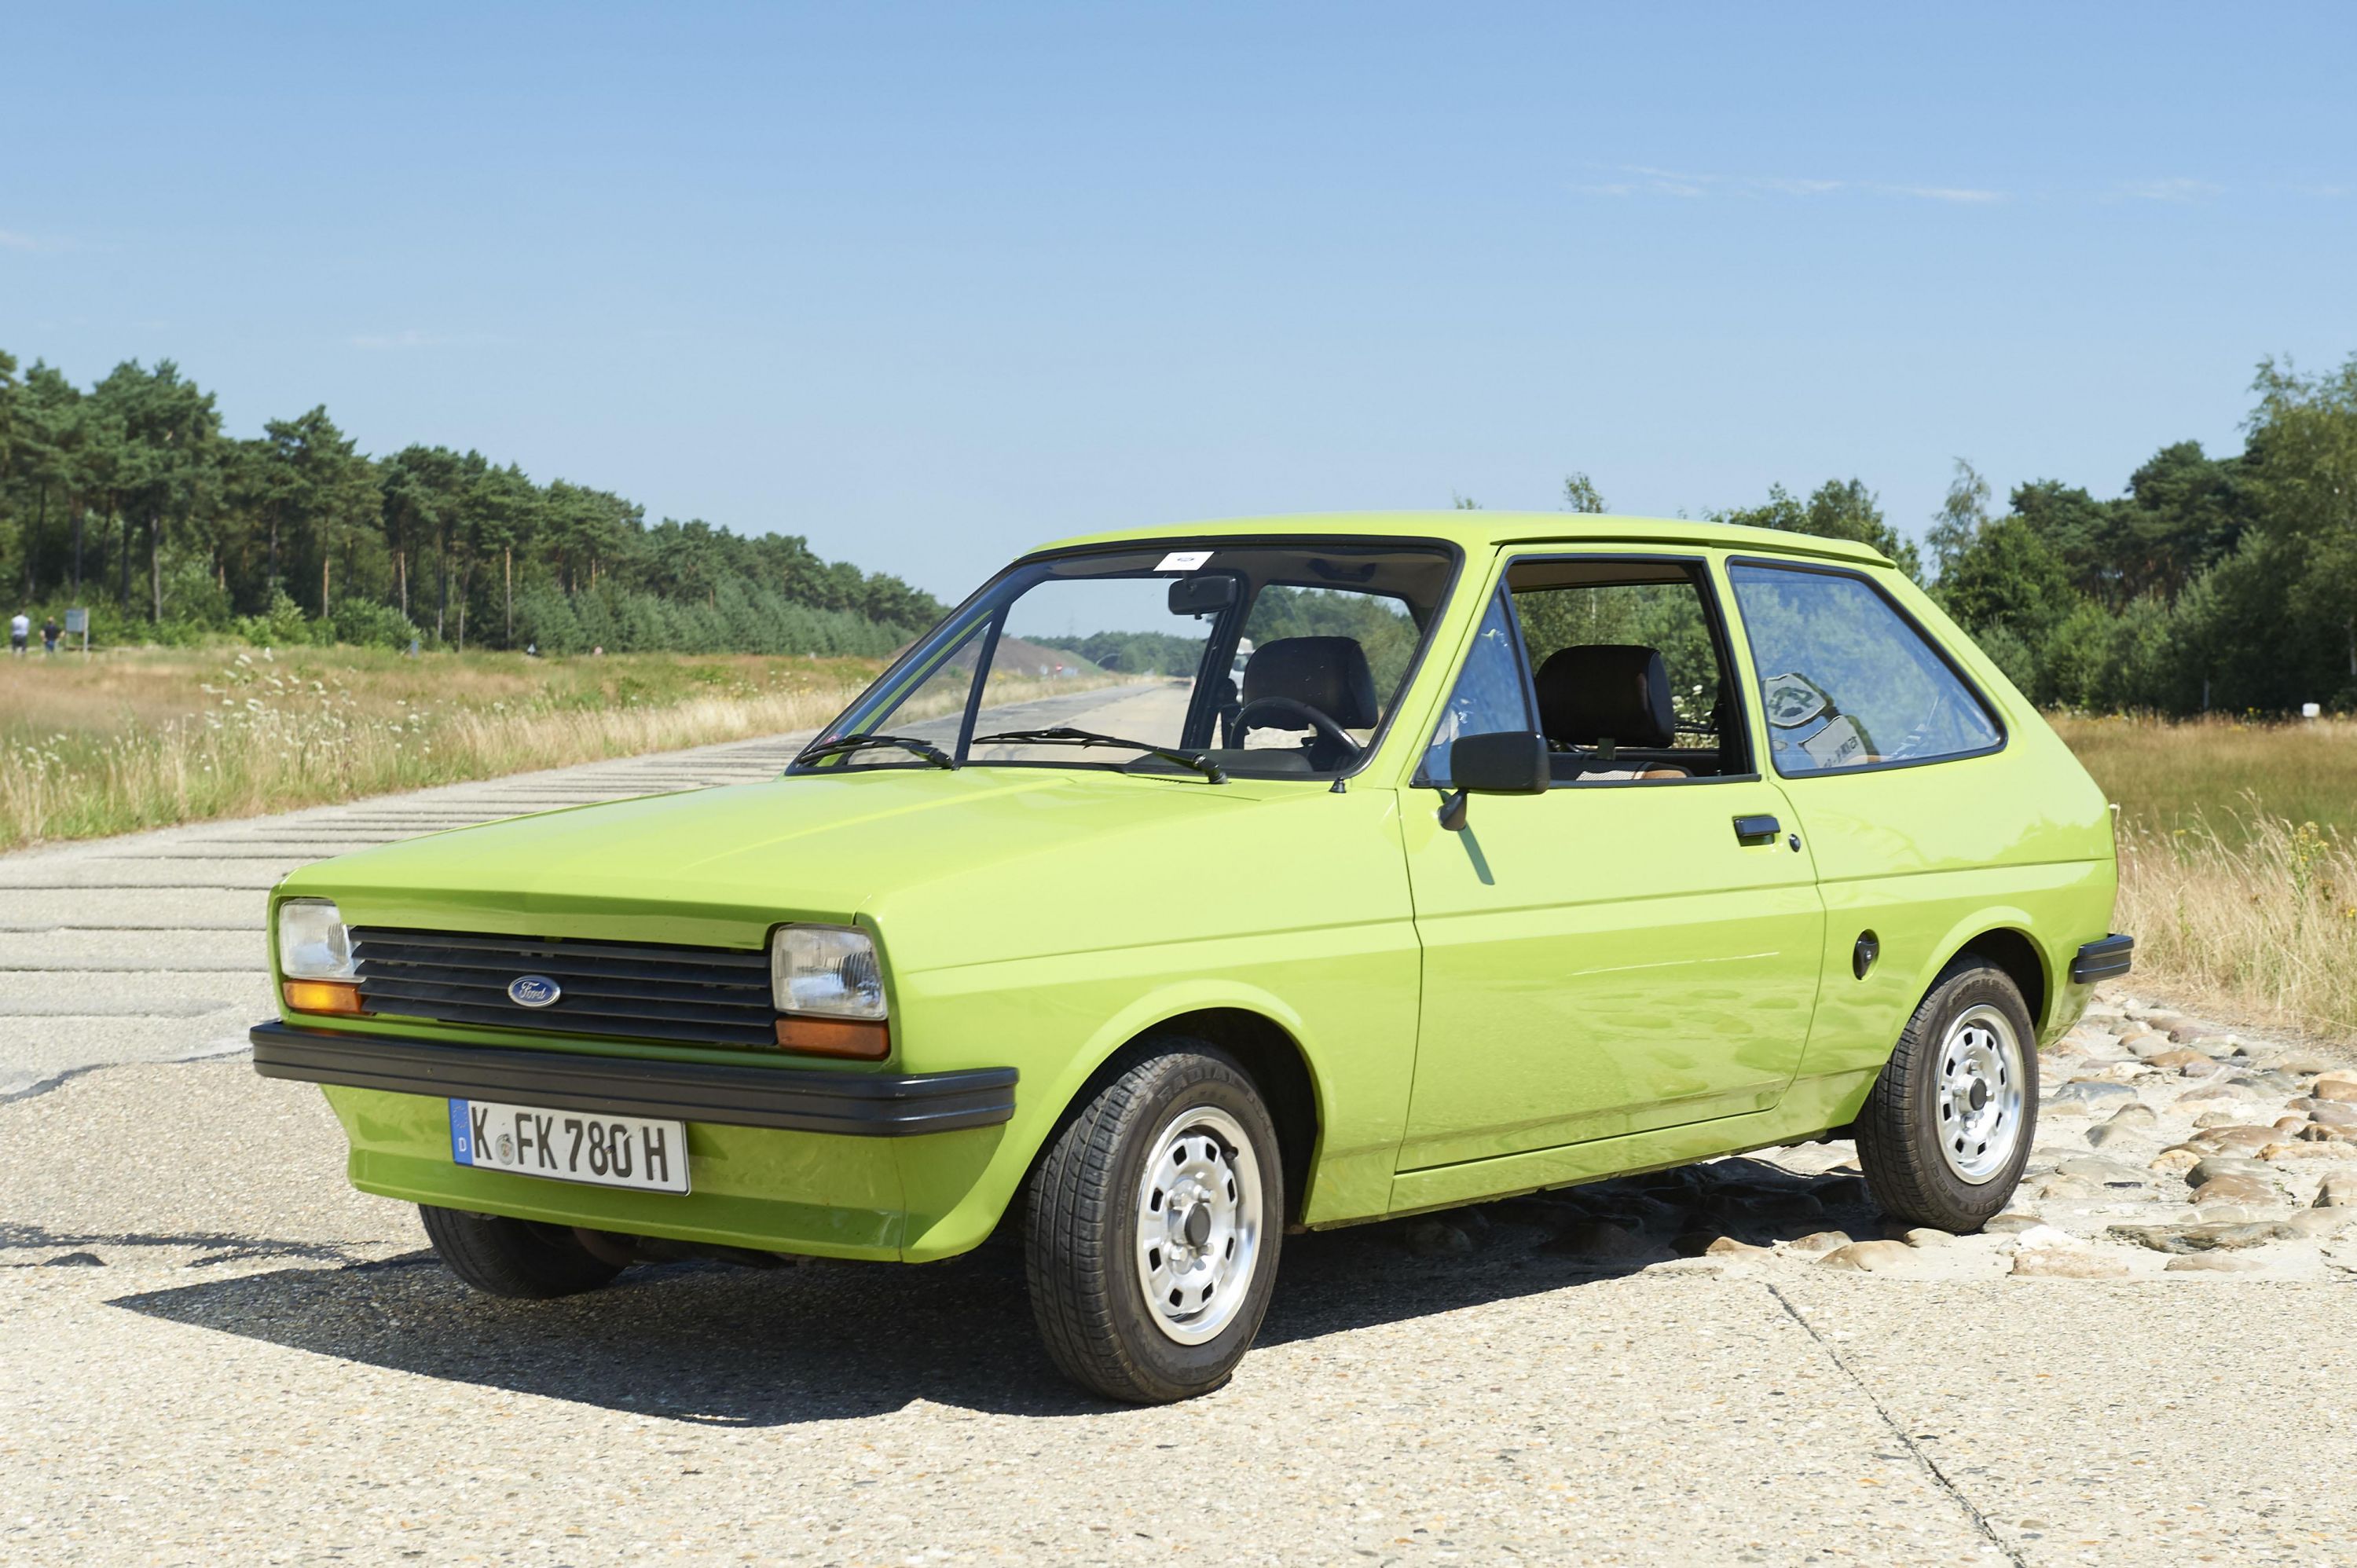 Ford Focus MK1 2.0 Ghia - What's all the fuss about?